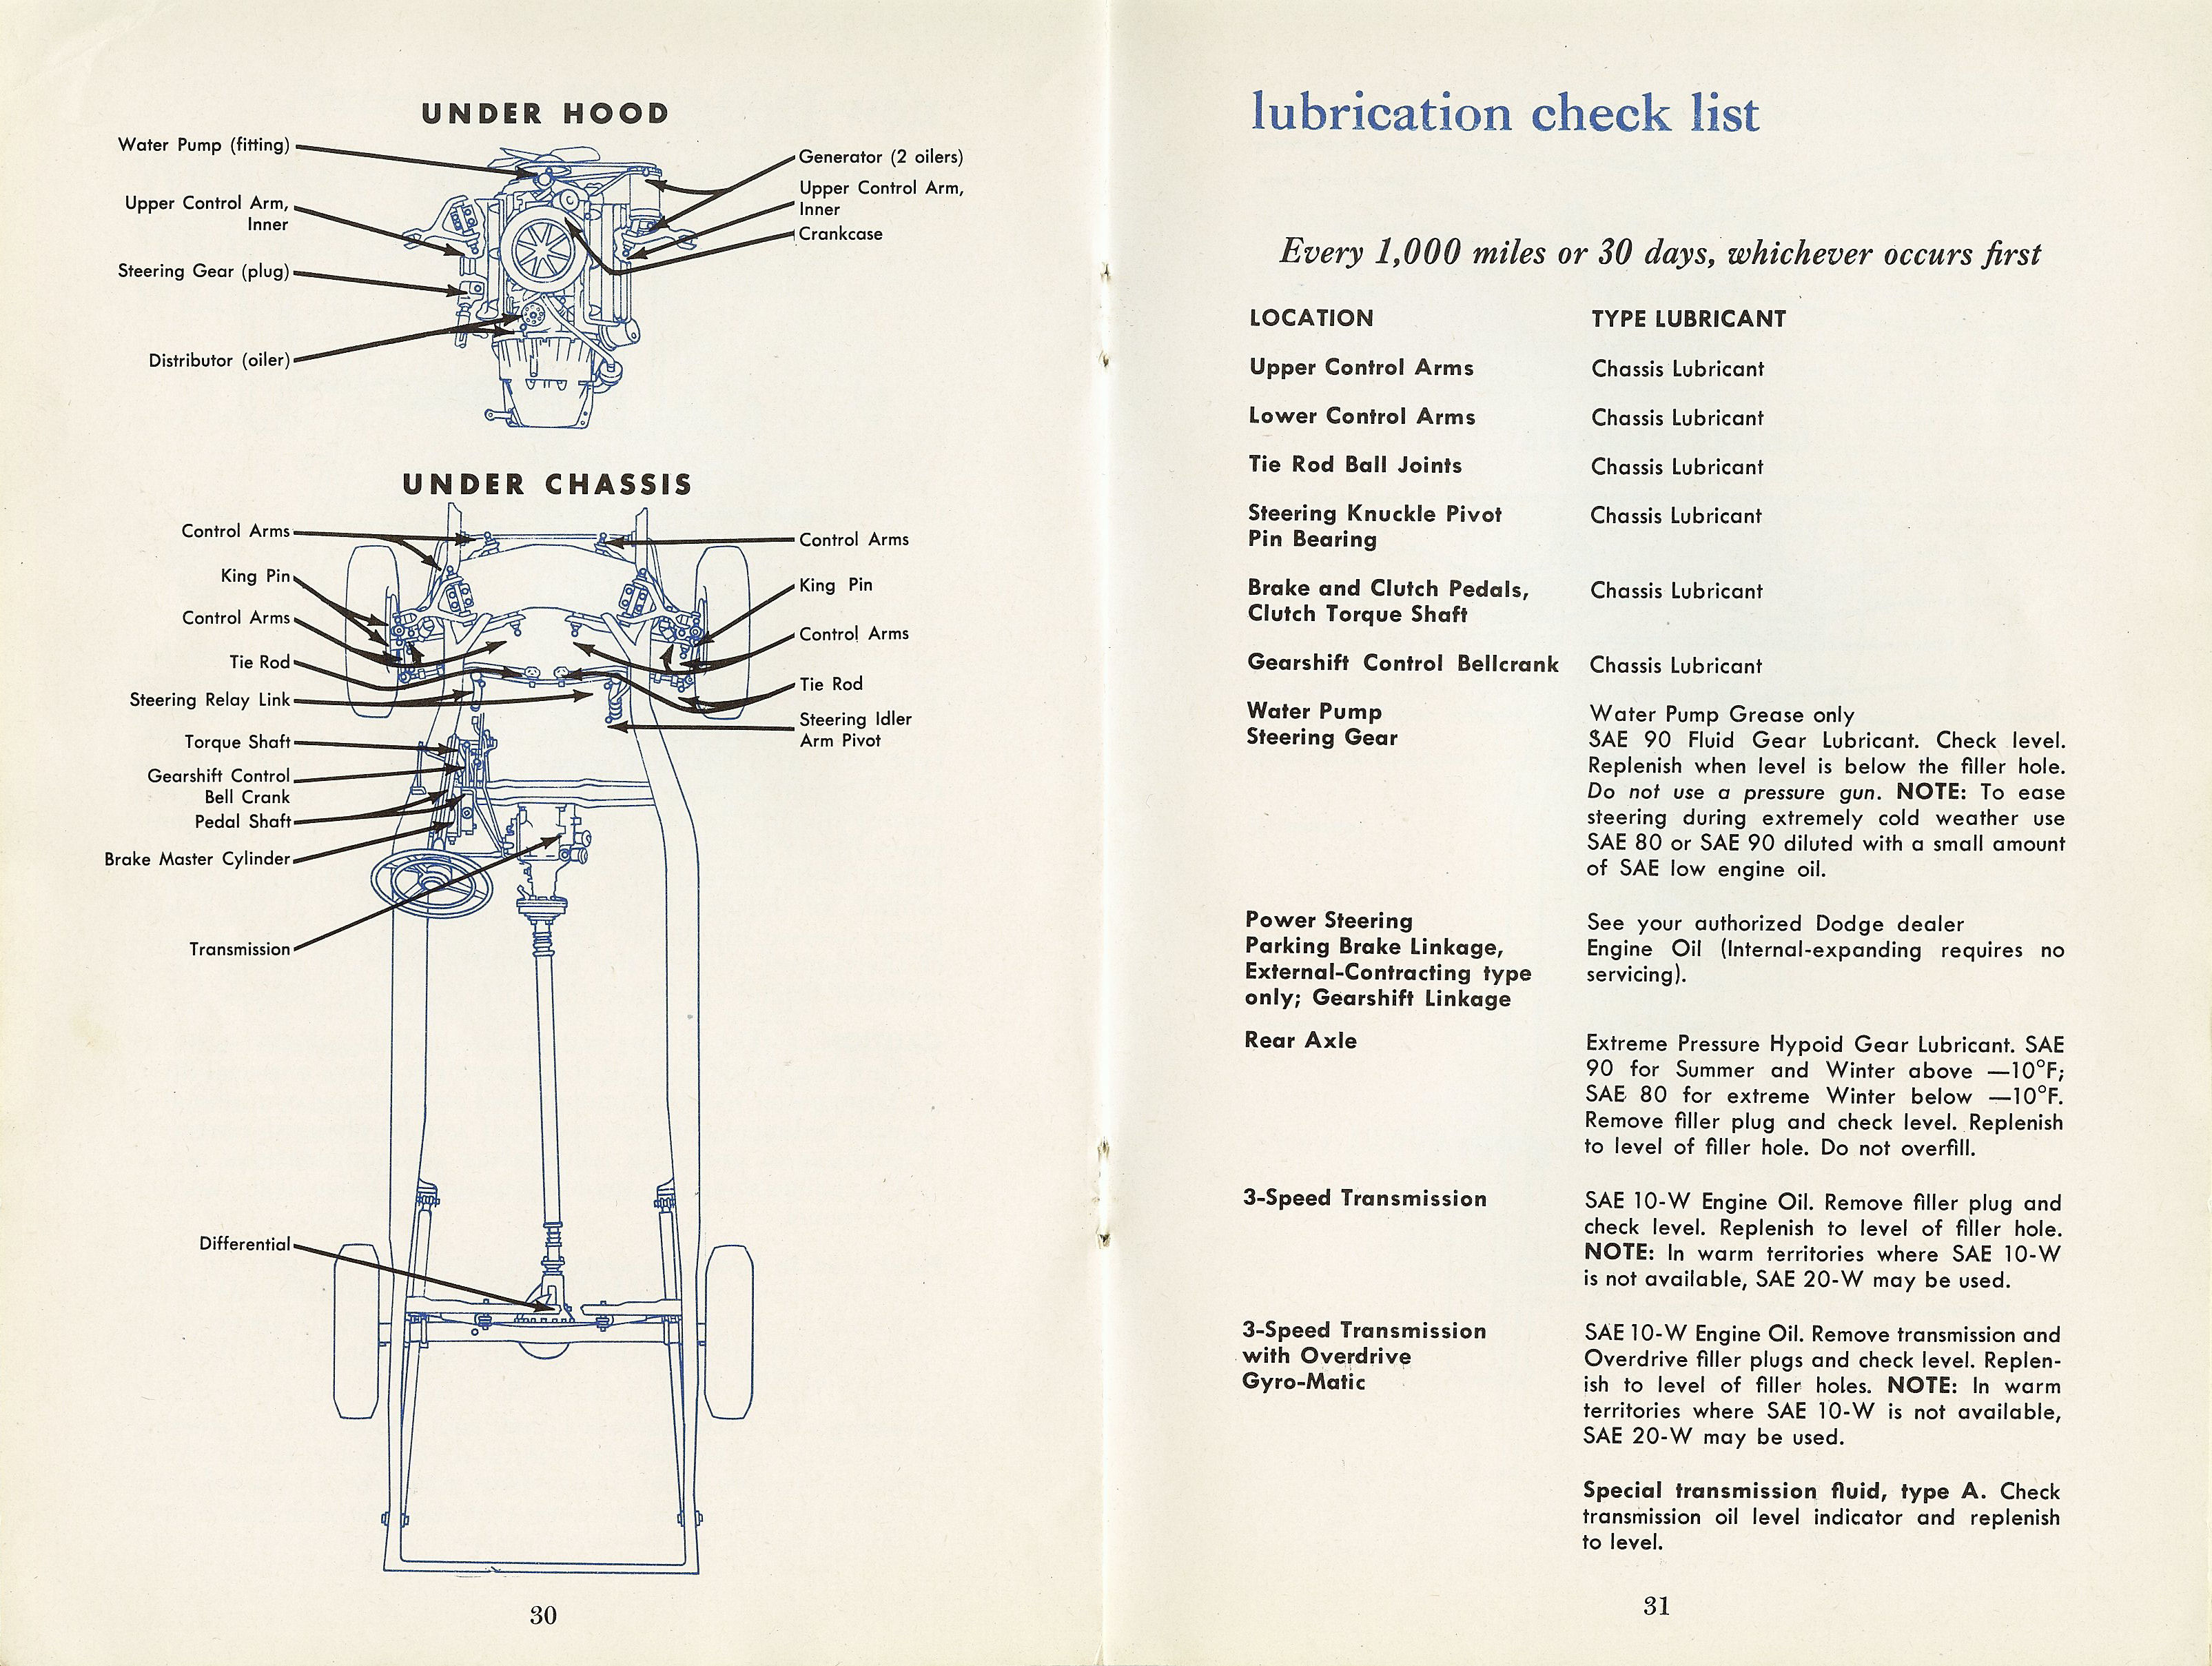 1954 Dodge Car Owners Manual Page 15